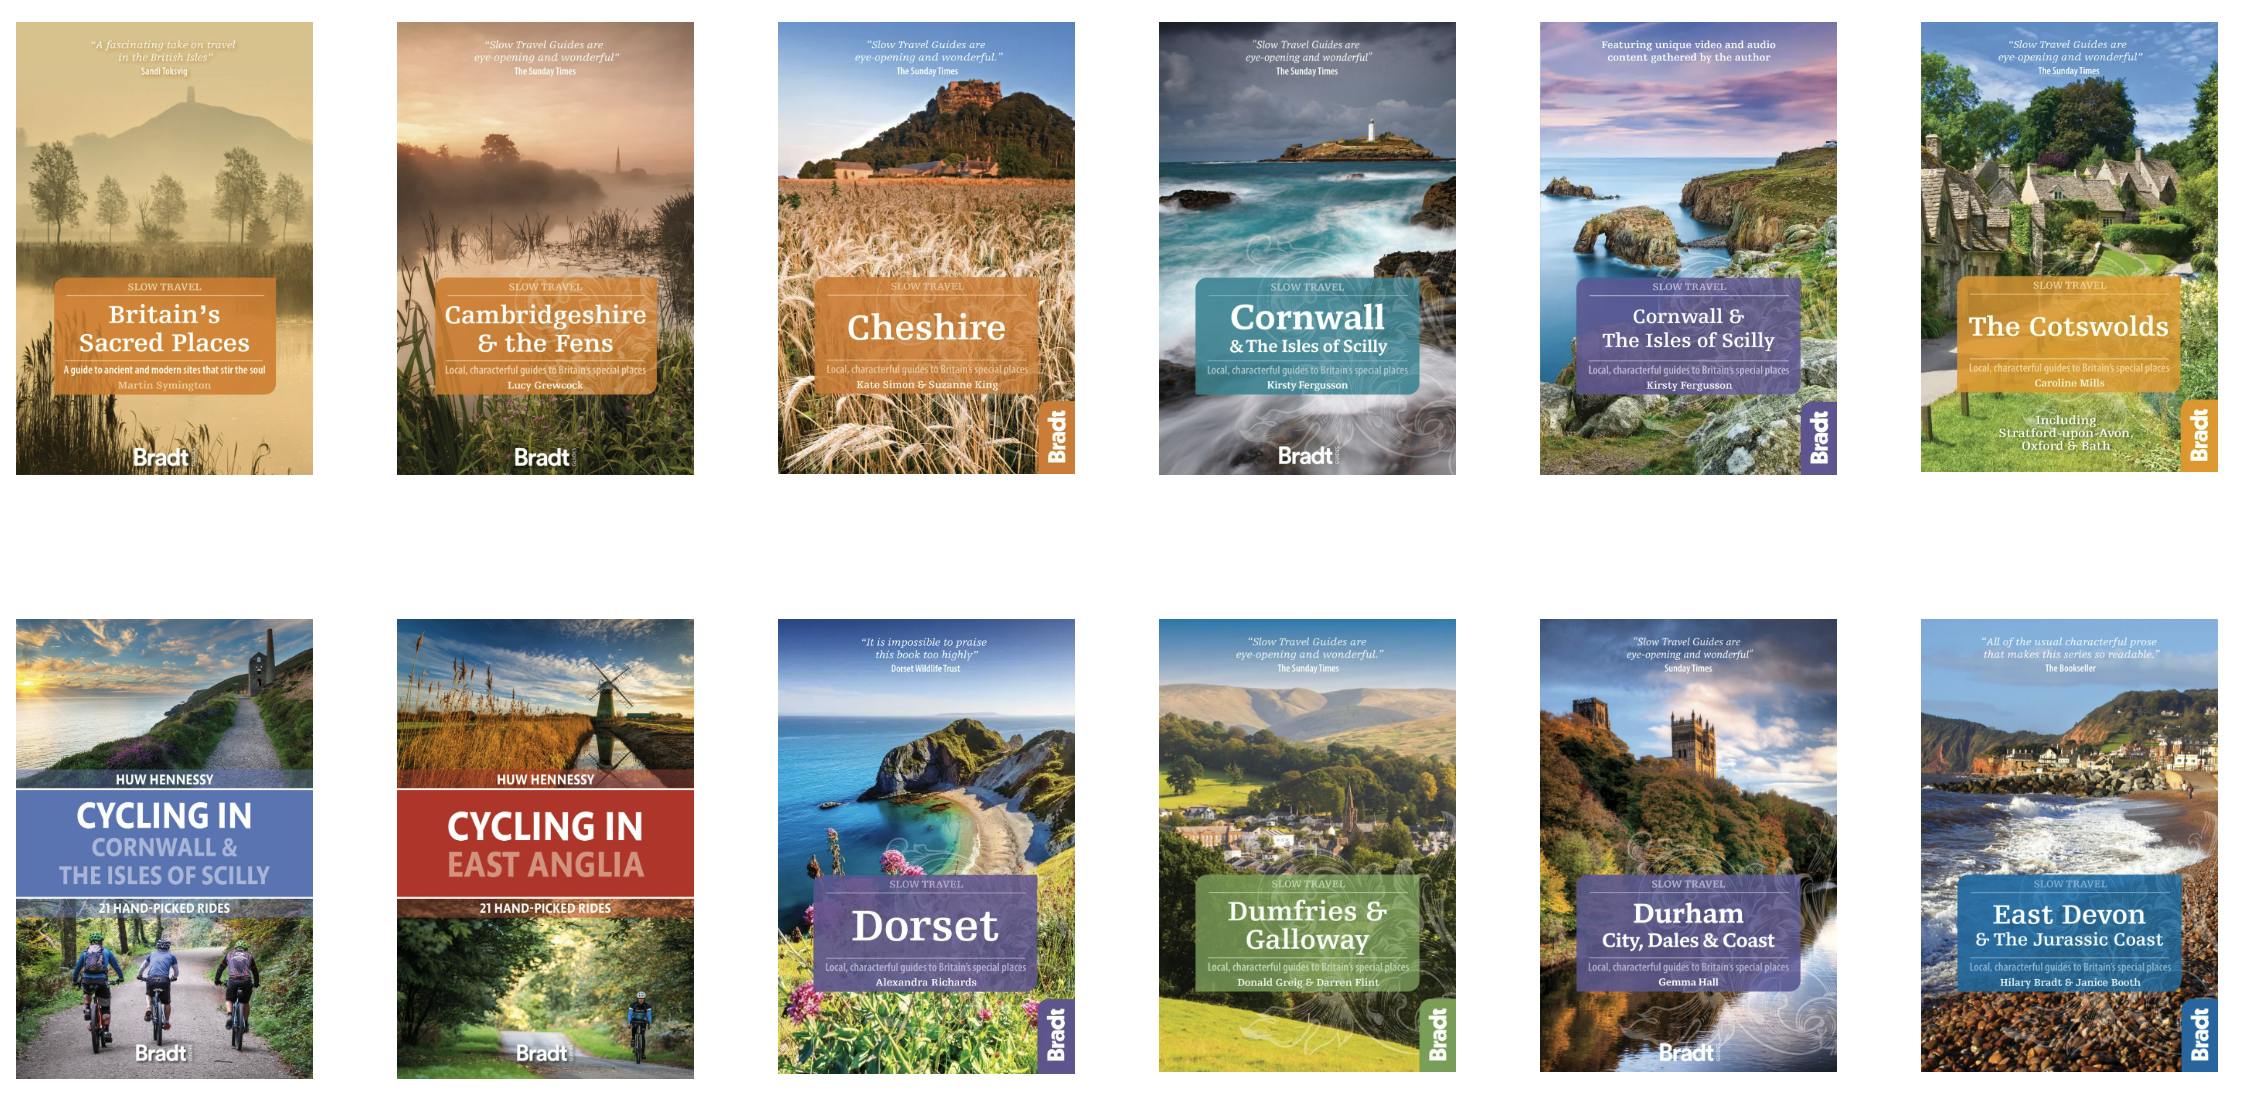 Slow travel book collection from Bradt